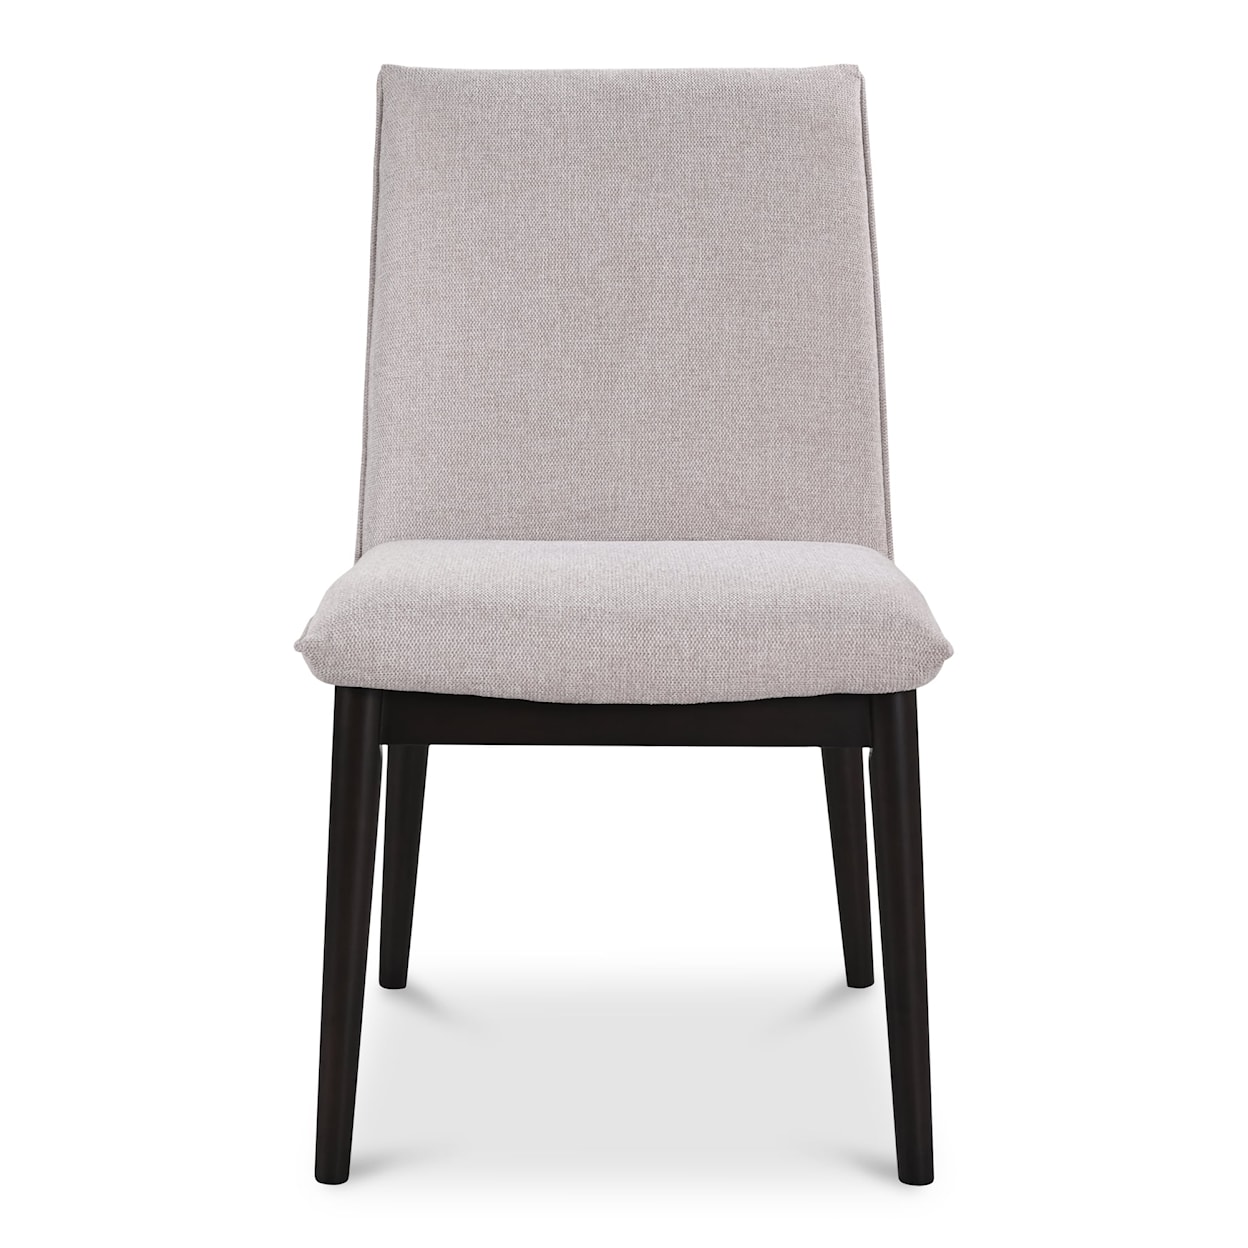 Moe's Home Collection Charlie Dining Chair